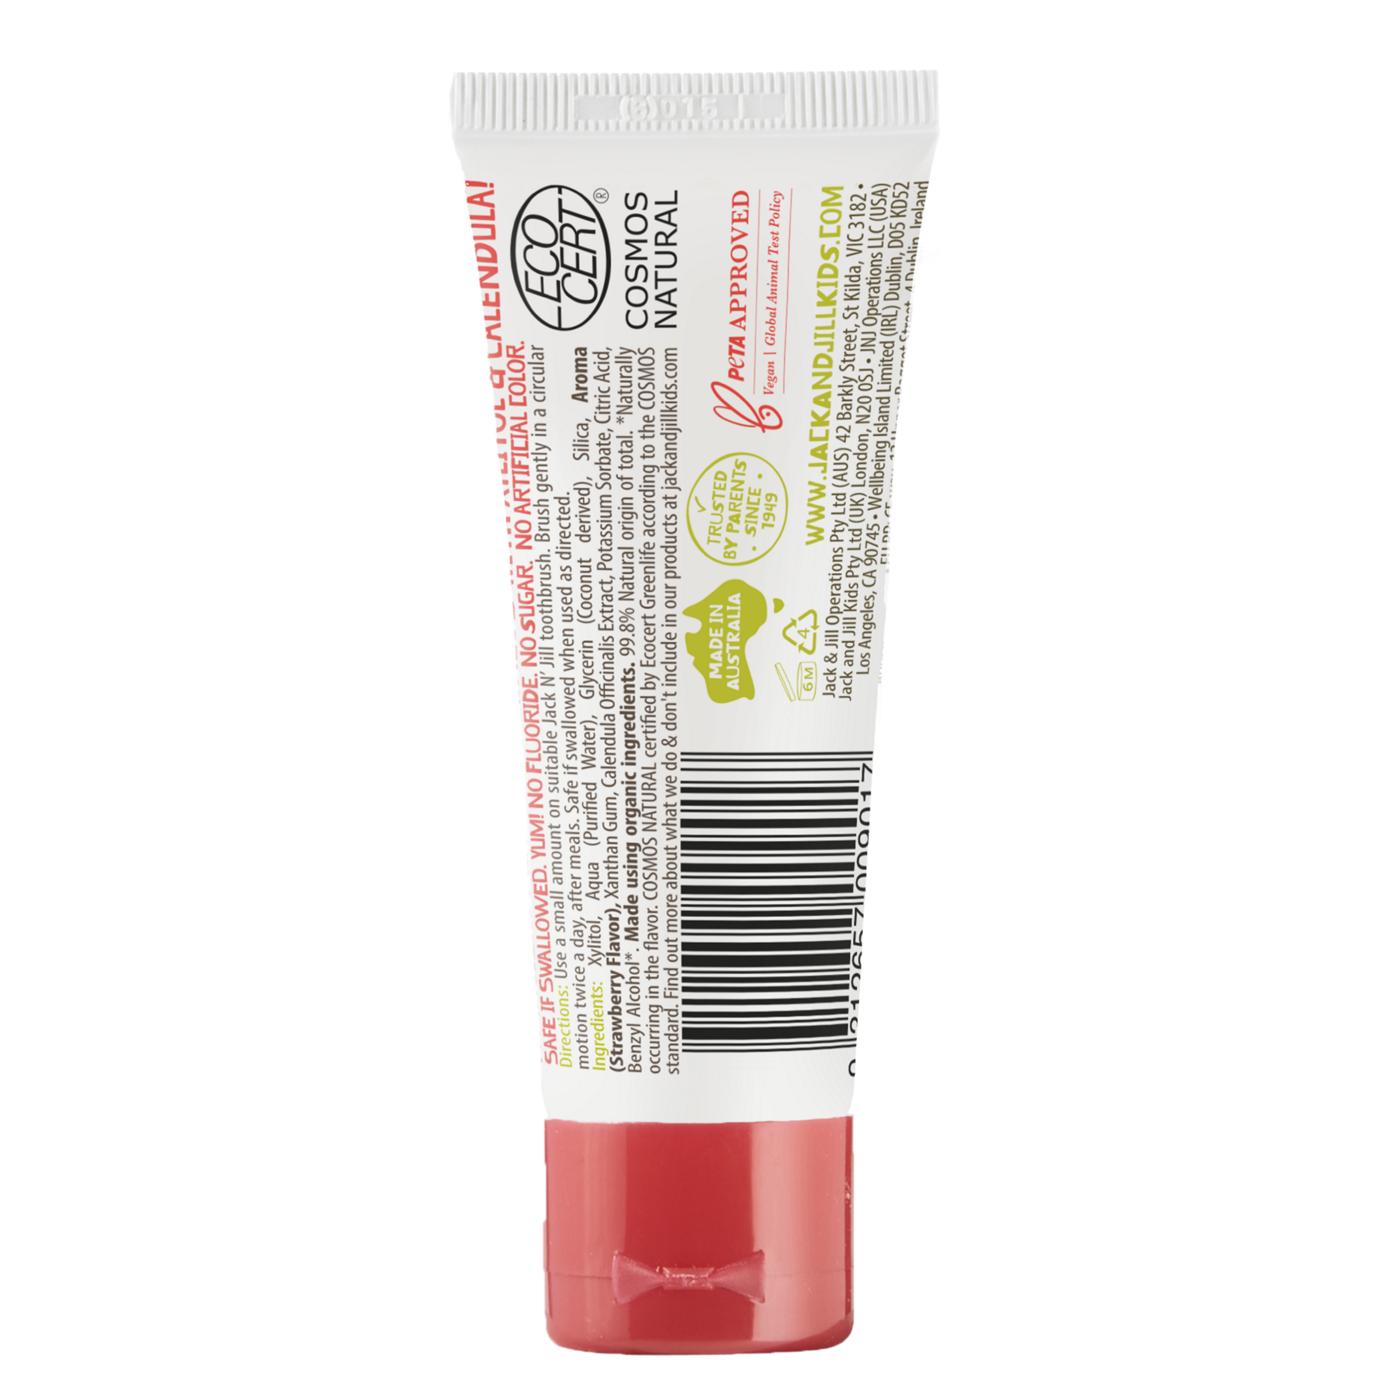 Jack N' Jill Natural Certified Toothpaste - Strawberry; image 2 of 2